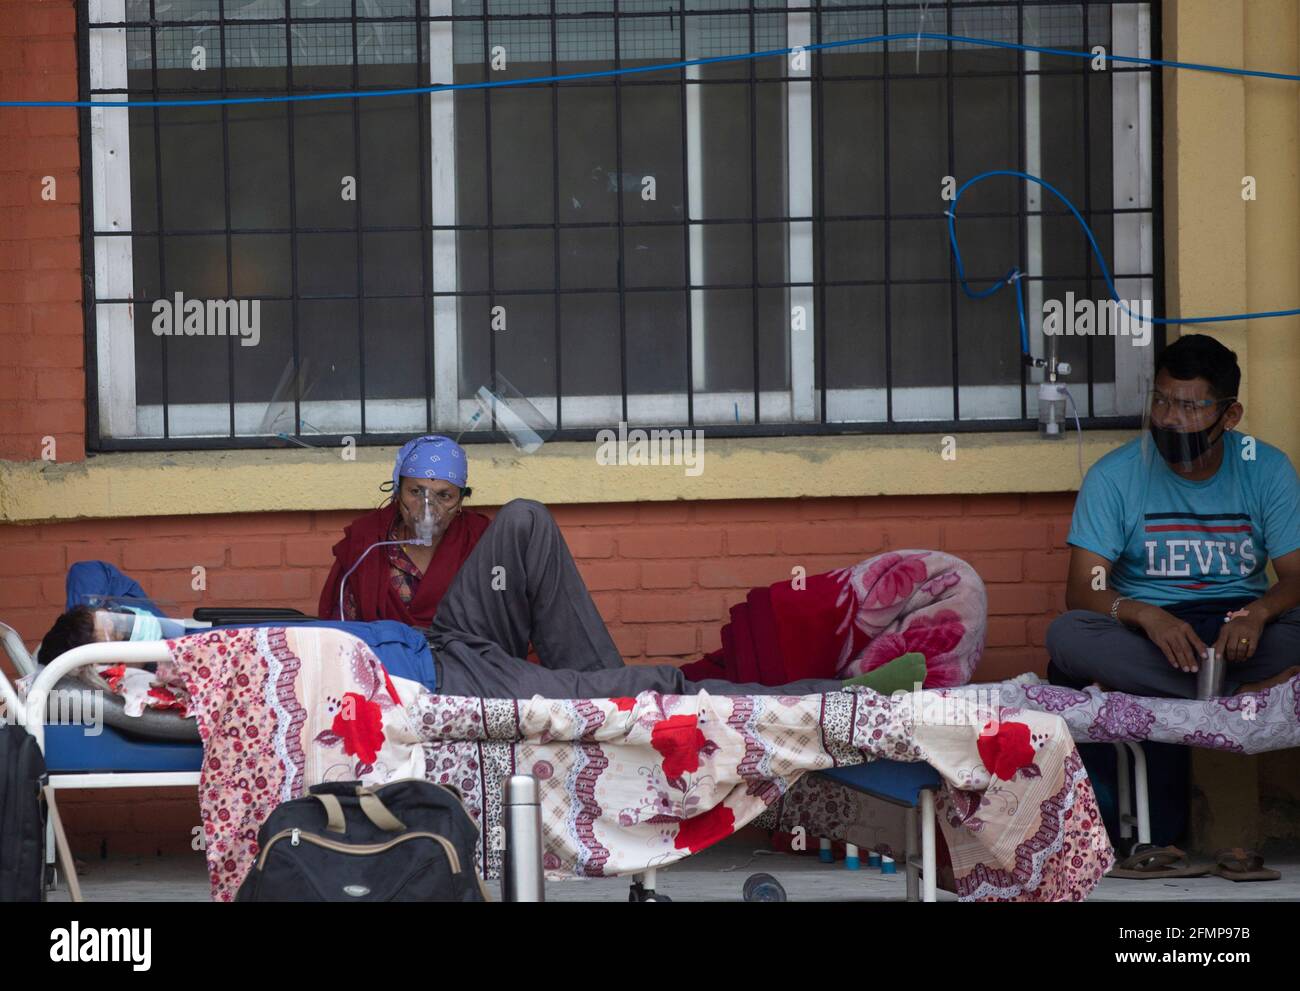 Kathmandu, Nepal. 11th May, 2021. Patients receive oxygen as they wait outside the passage of a hospital due to a lack of free beds inside the hospital for coronavirus disease (COVID-19) patients, as the second major coronavirus wave surges in Kathmandu, Nepal, May 11, 2021. Credit: Dipen Shrestha/ZUMA Wire/Alamy Live News Stock Photo